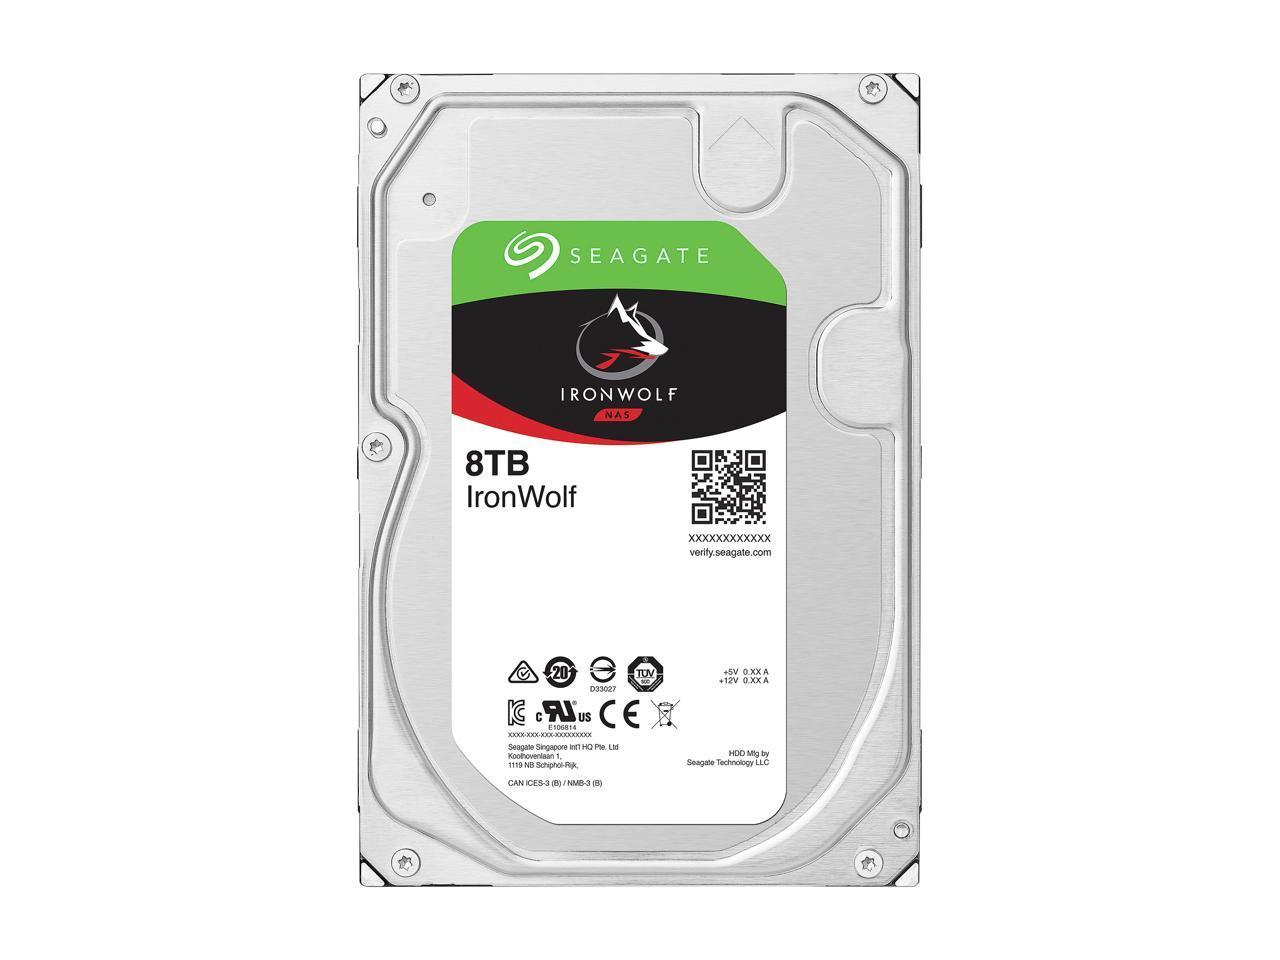 Хард диск SEAGATE IronWolf ST8000VN004, 8TB, 256MB Cache, SATA 6.0Gb/s-4